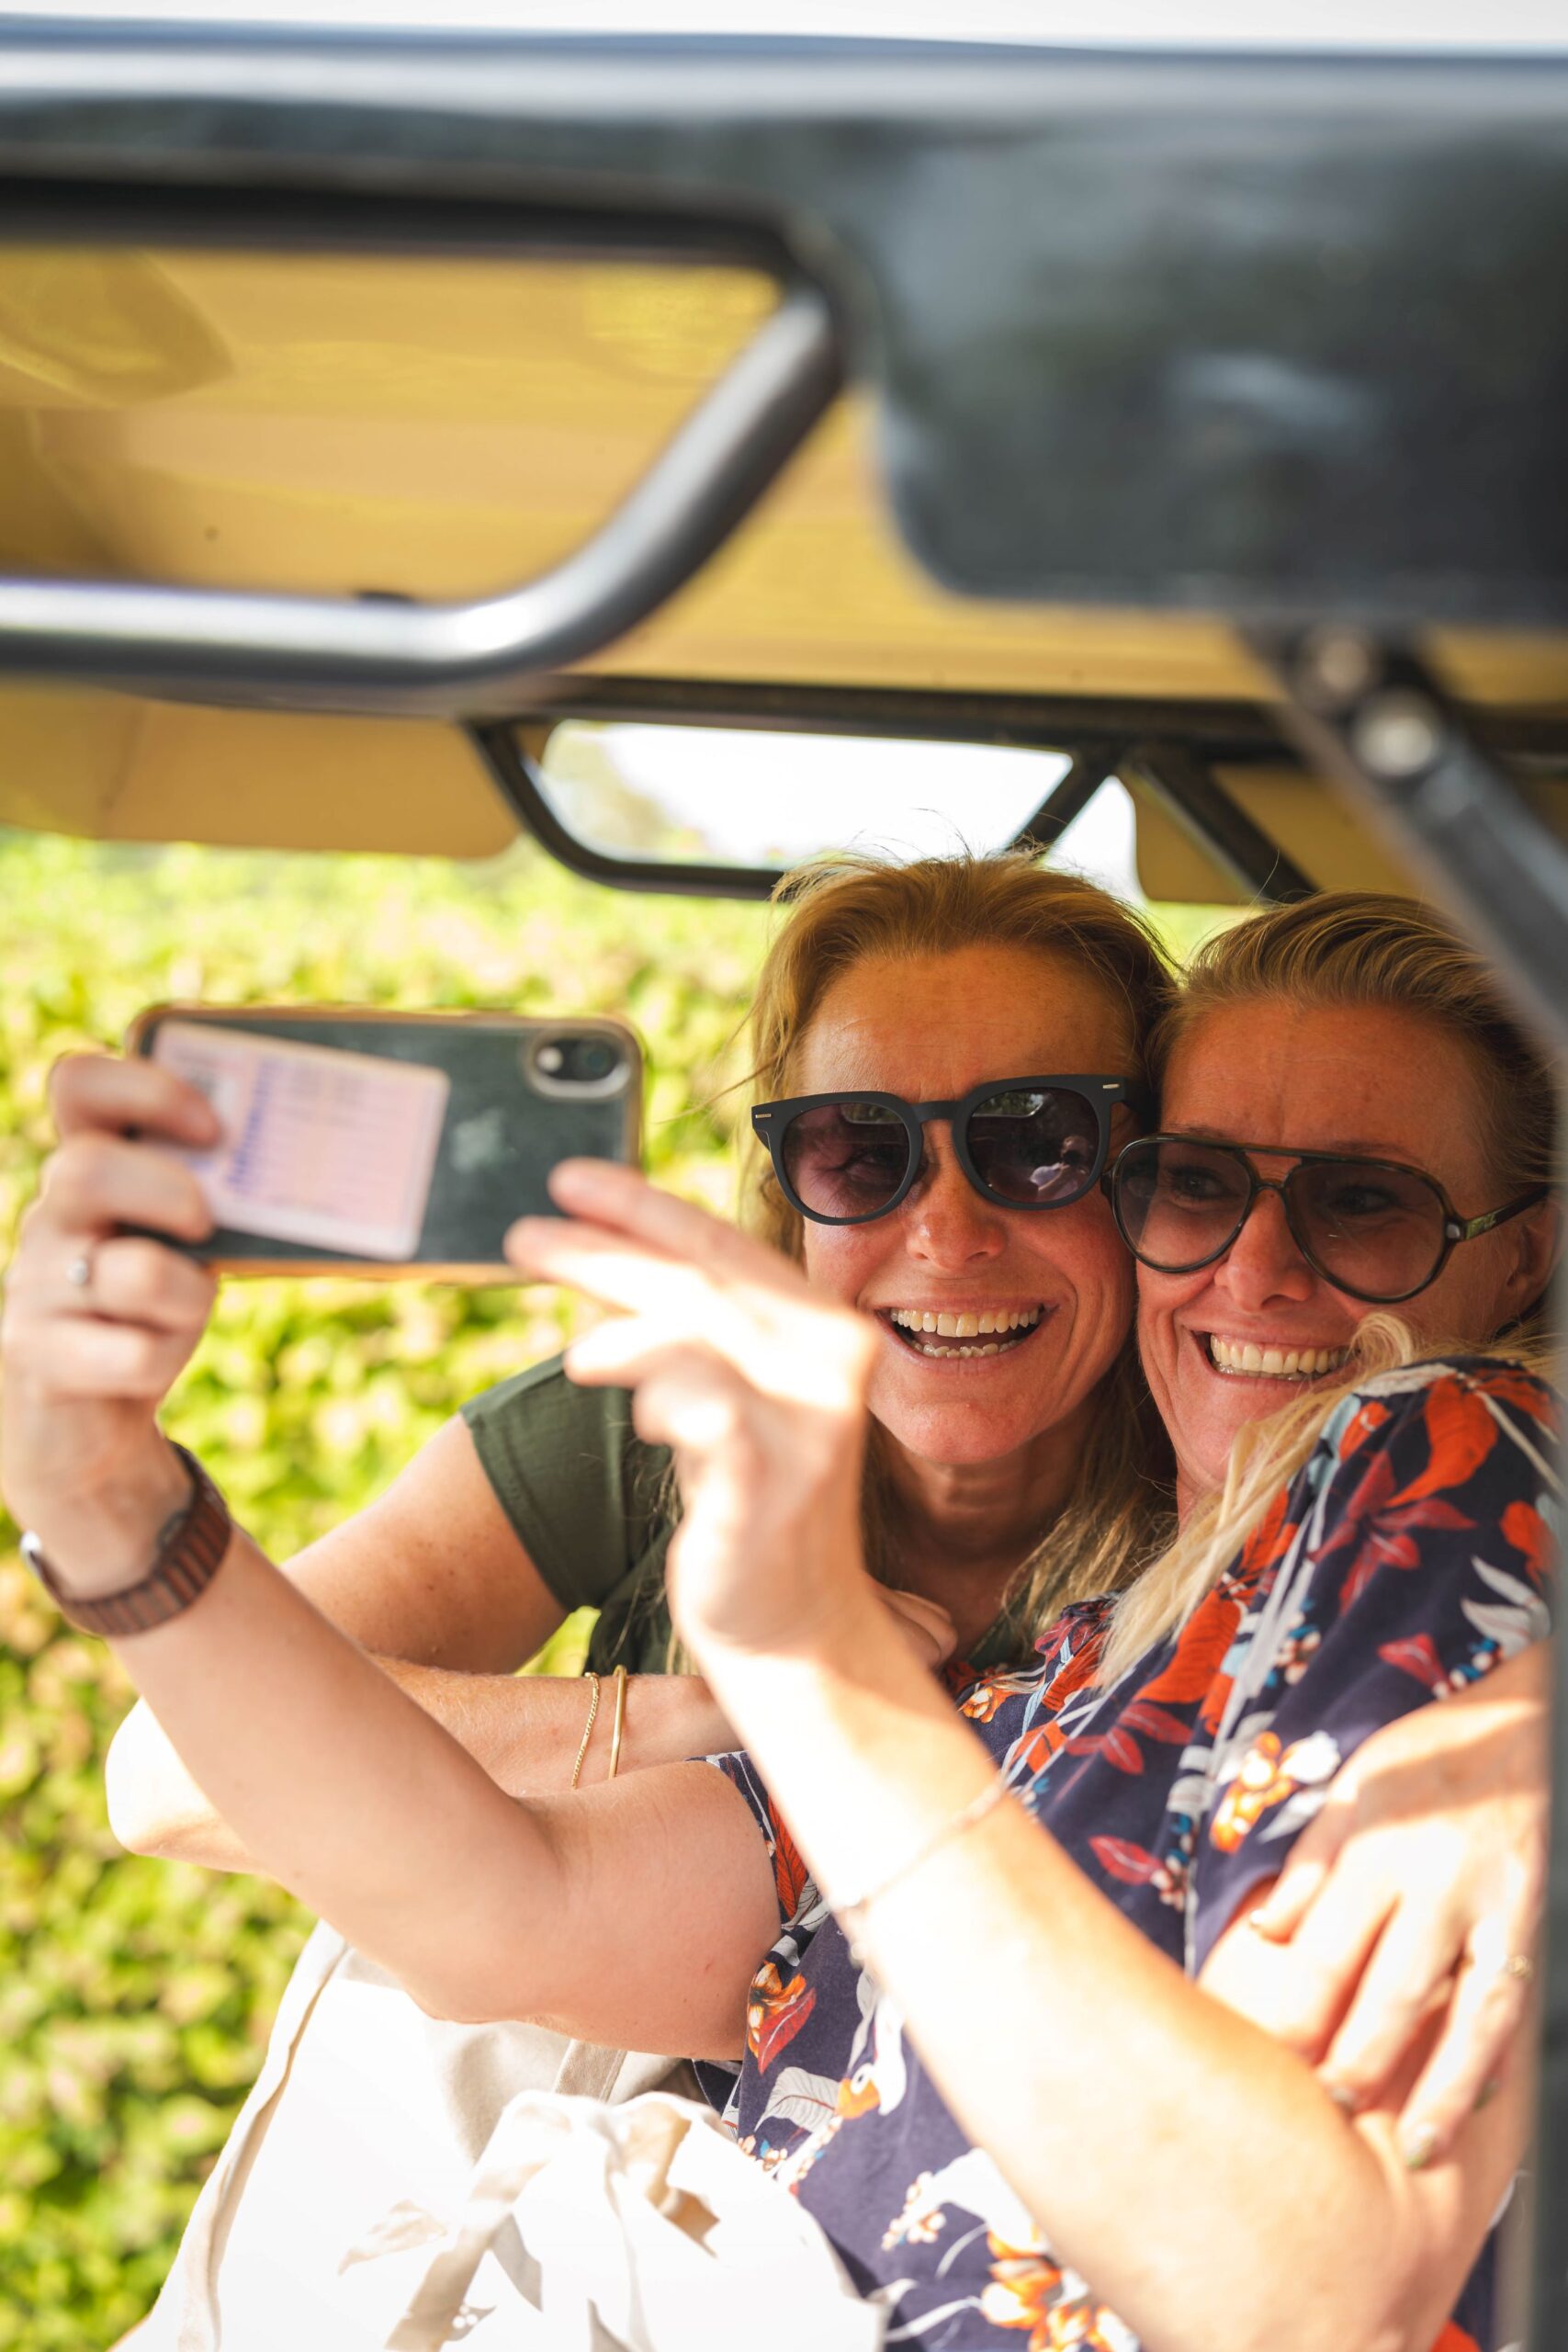 Selfie time during Brut Wines & Tours